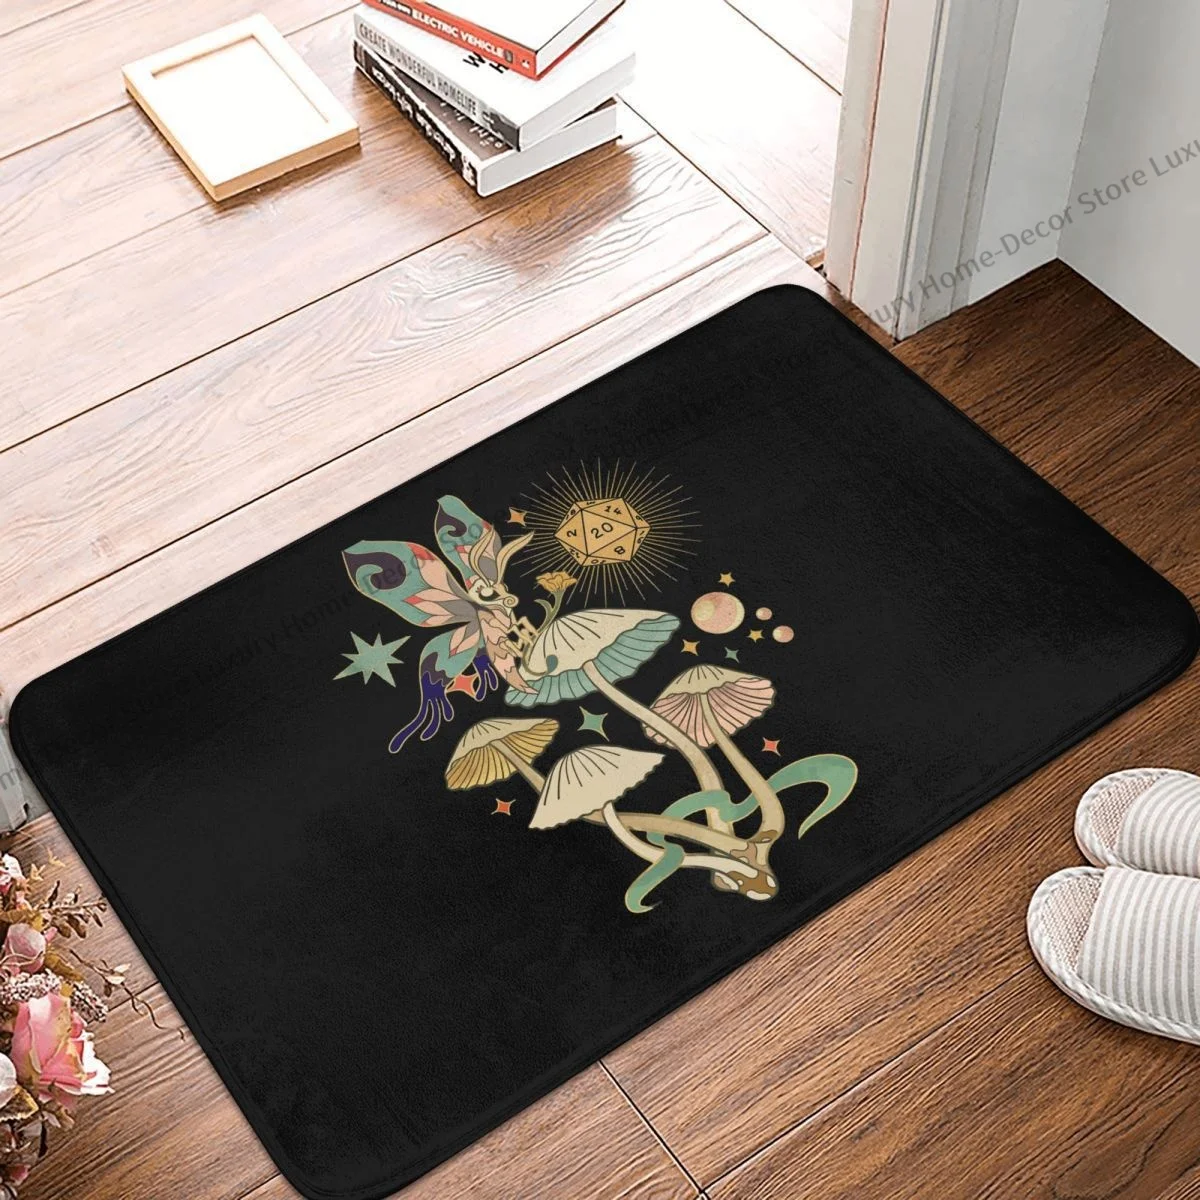 

Dnd Non-slip Doormat D20 Dice With Magic Mushroom And Butterfly. Bath Bedroom Mat Welcome Carpet Indoor Pattern Decor